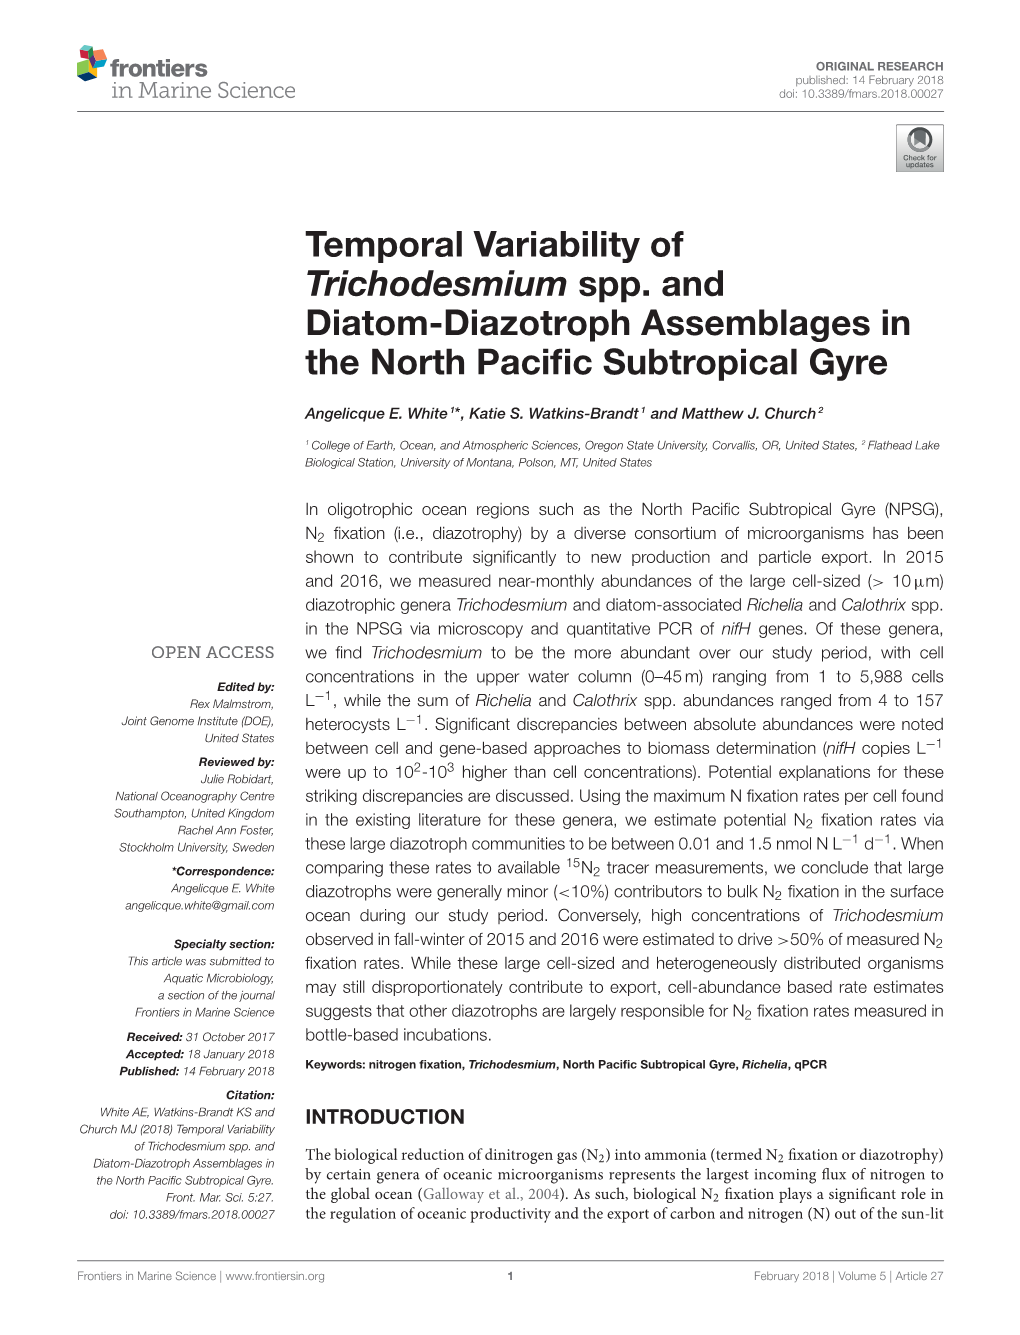 Temporal Variability of Trichodesmium Spp. and Diatom-Diazotroph Assemblages in the North Paciﬁc Subtropical Gyre